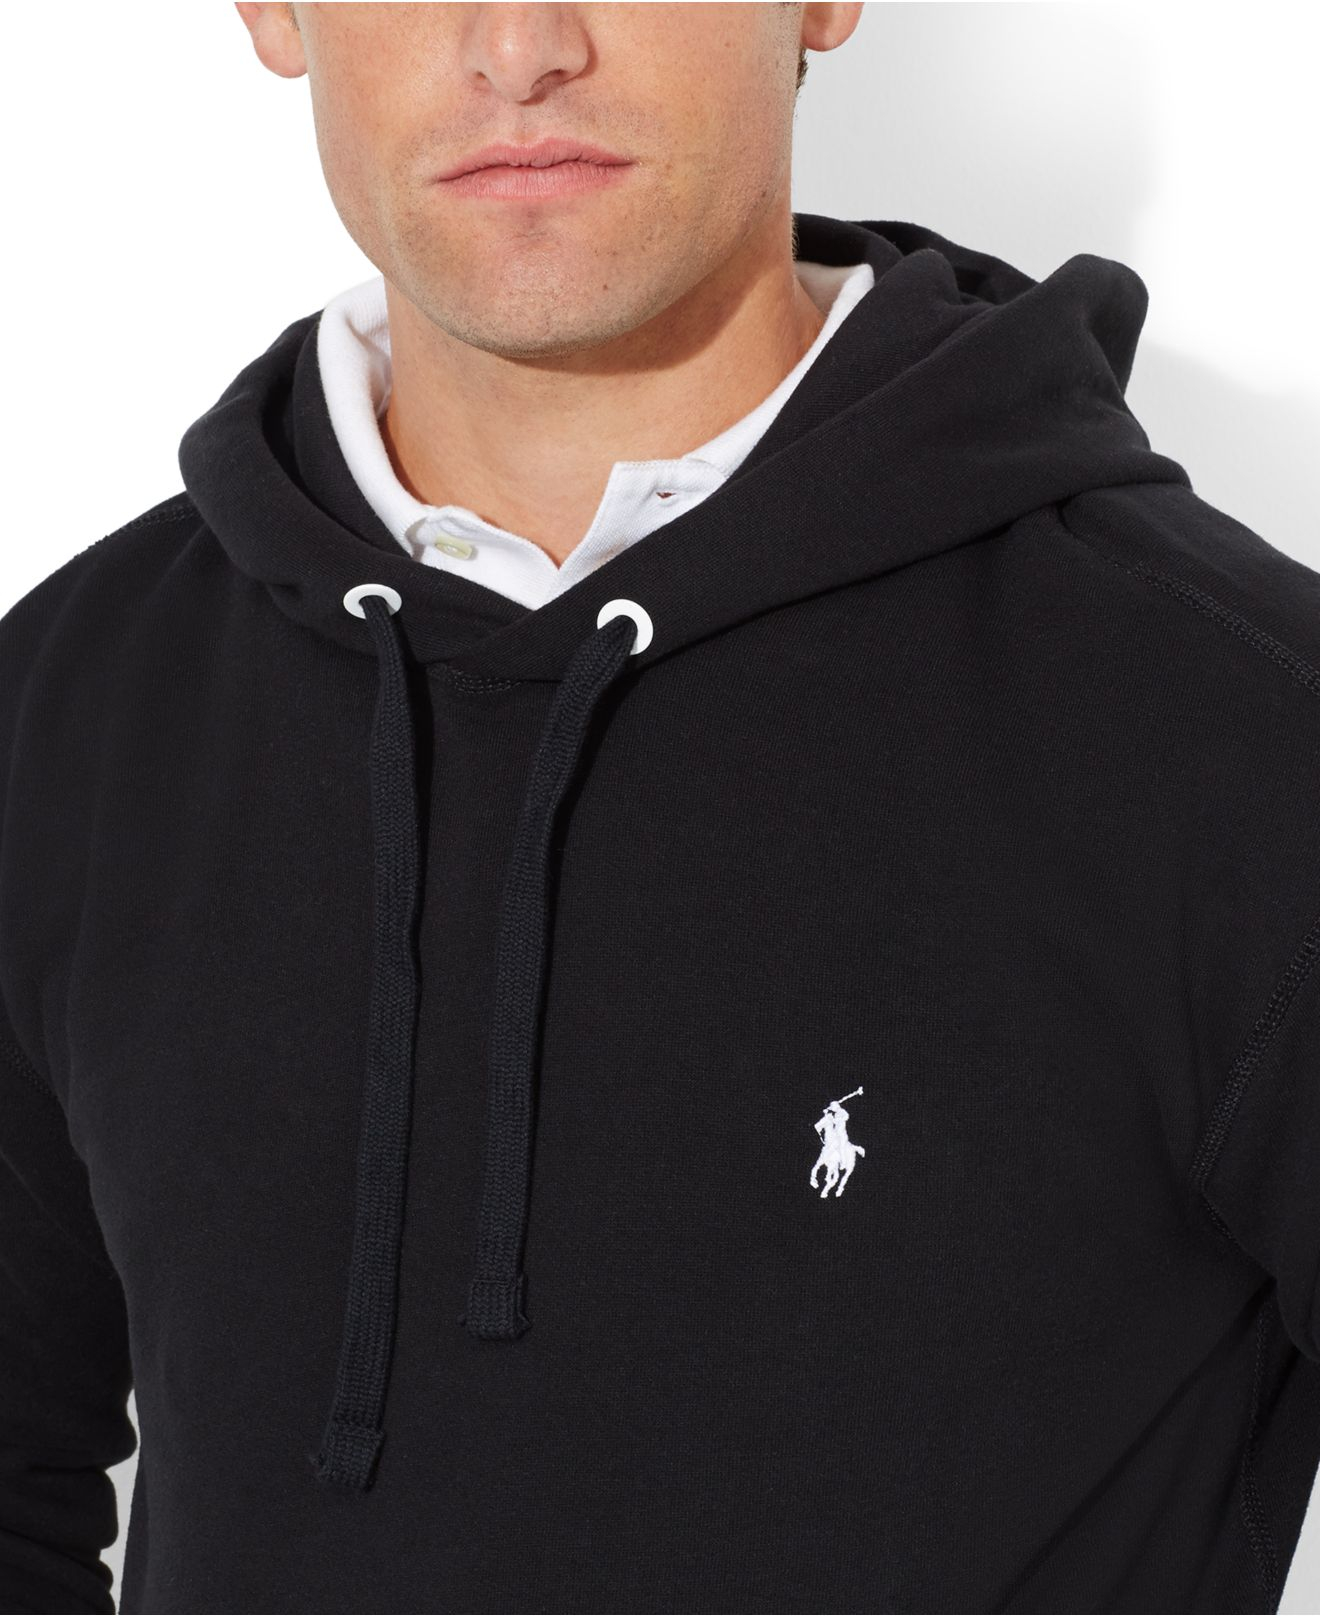 black polo hoodie with white horse